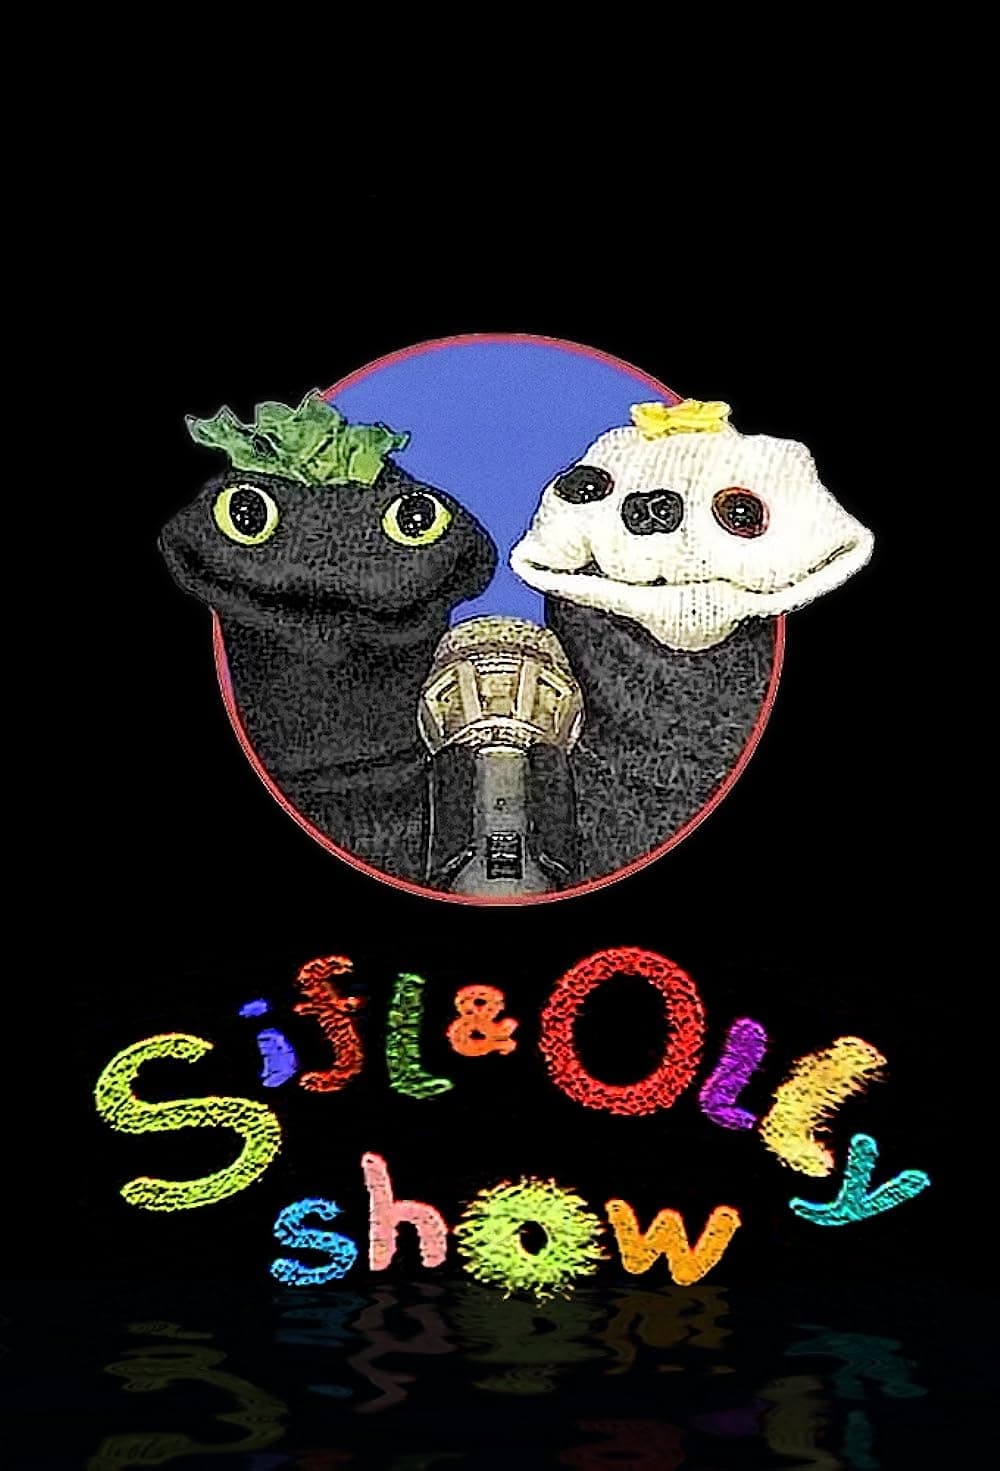 Sifl & Olly Show